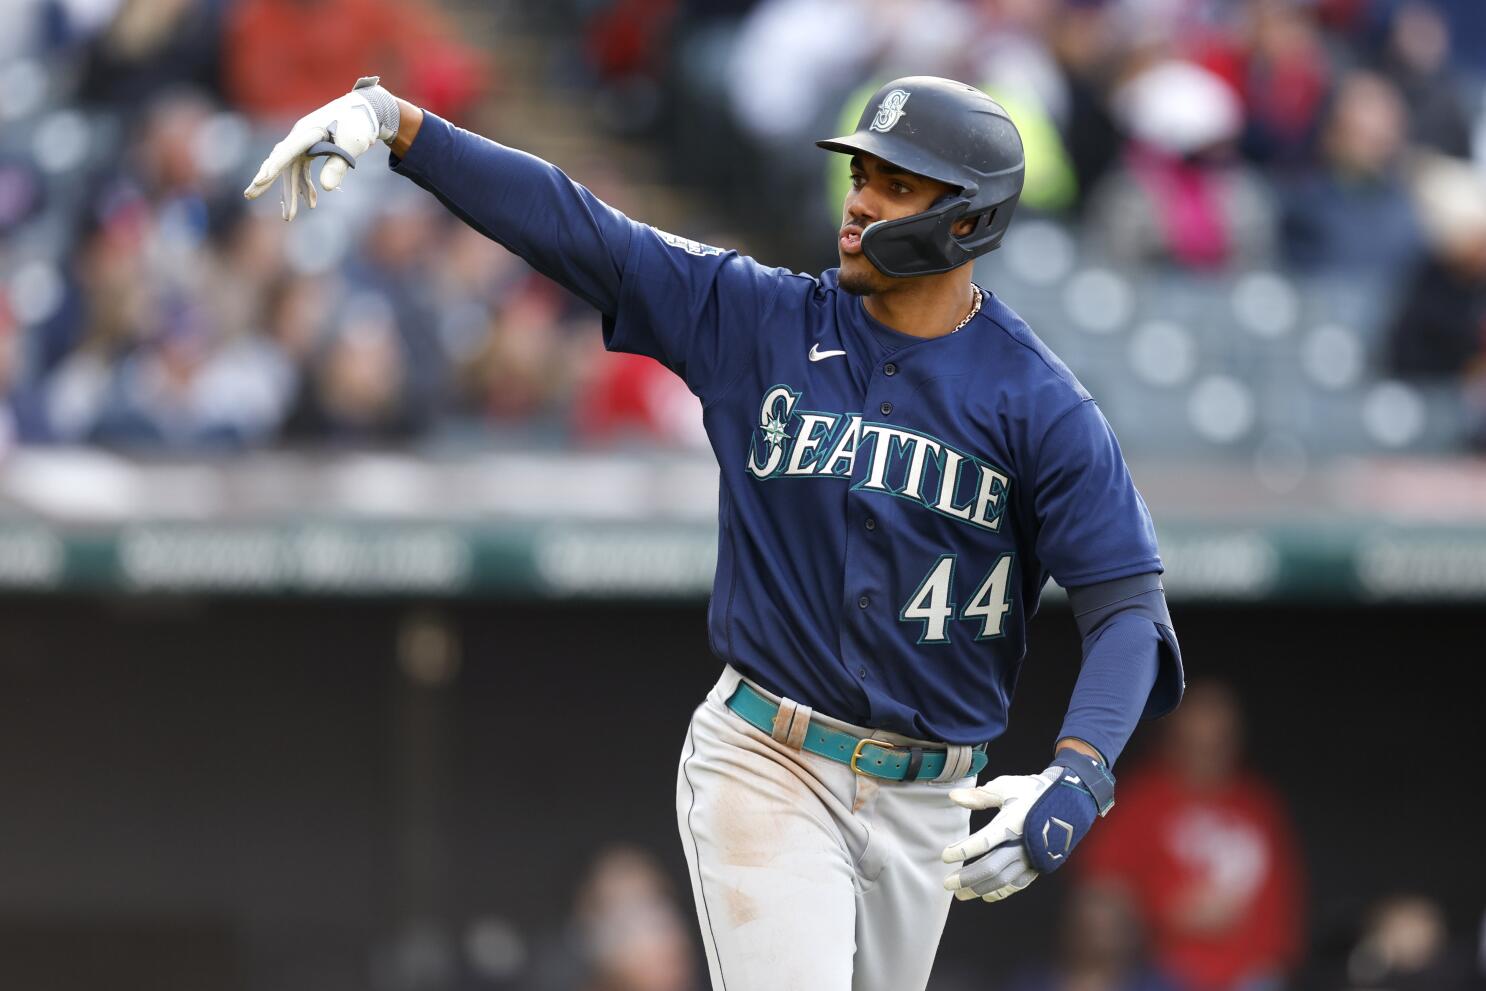 Ex-Mariners relive night they were on wrong side of history, 34